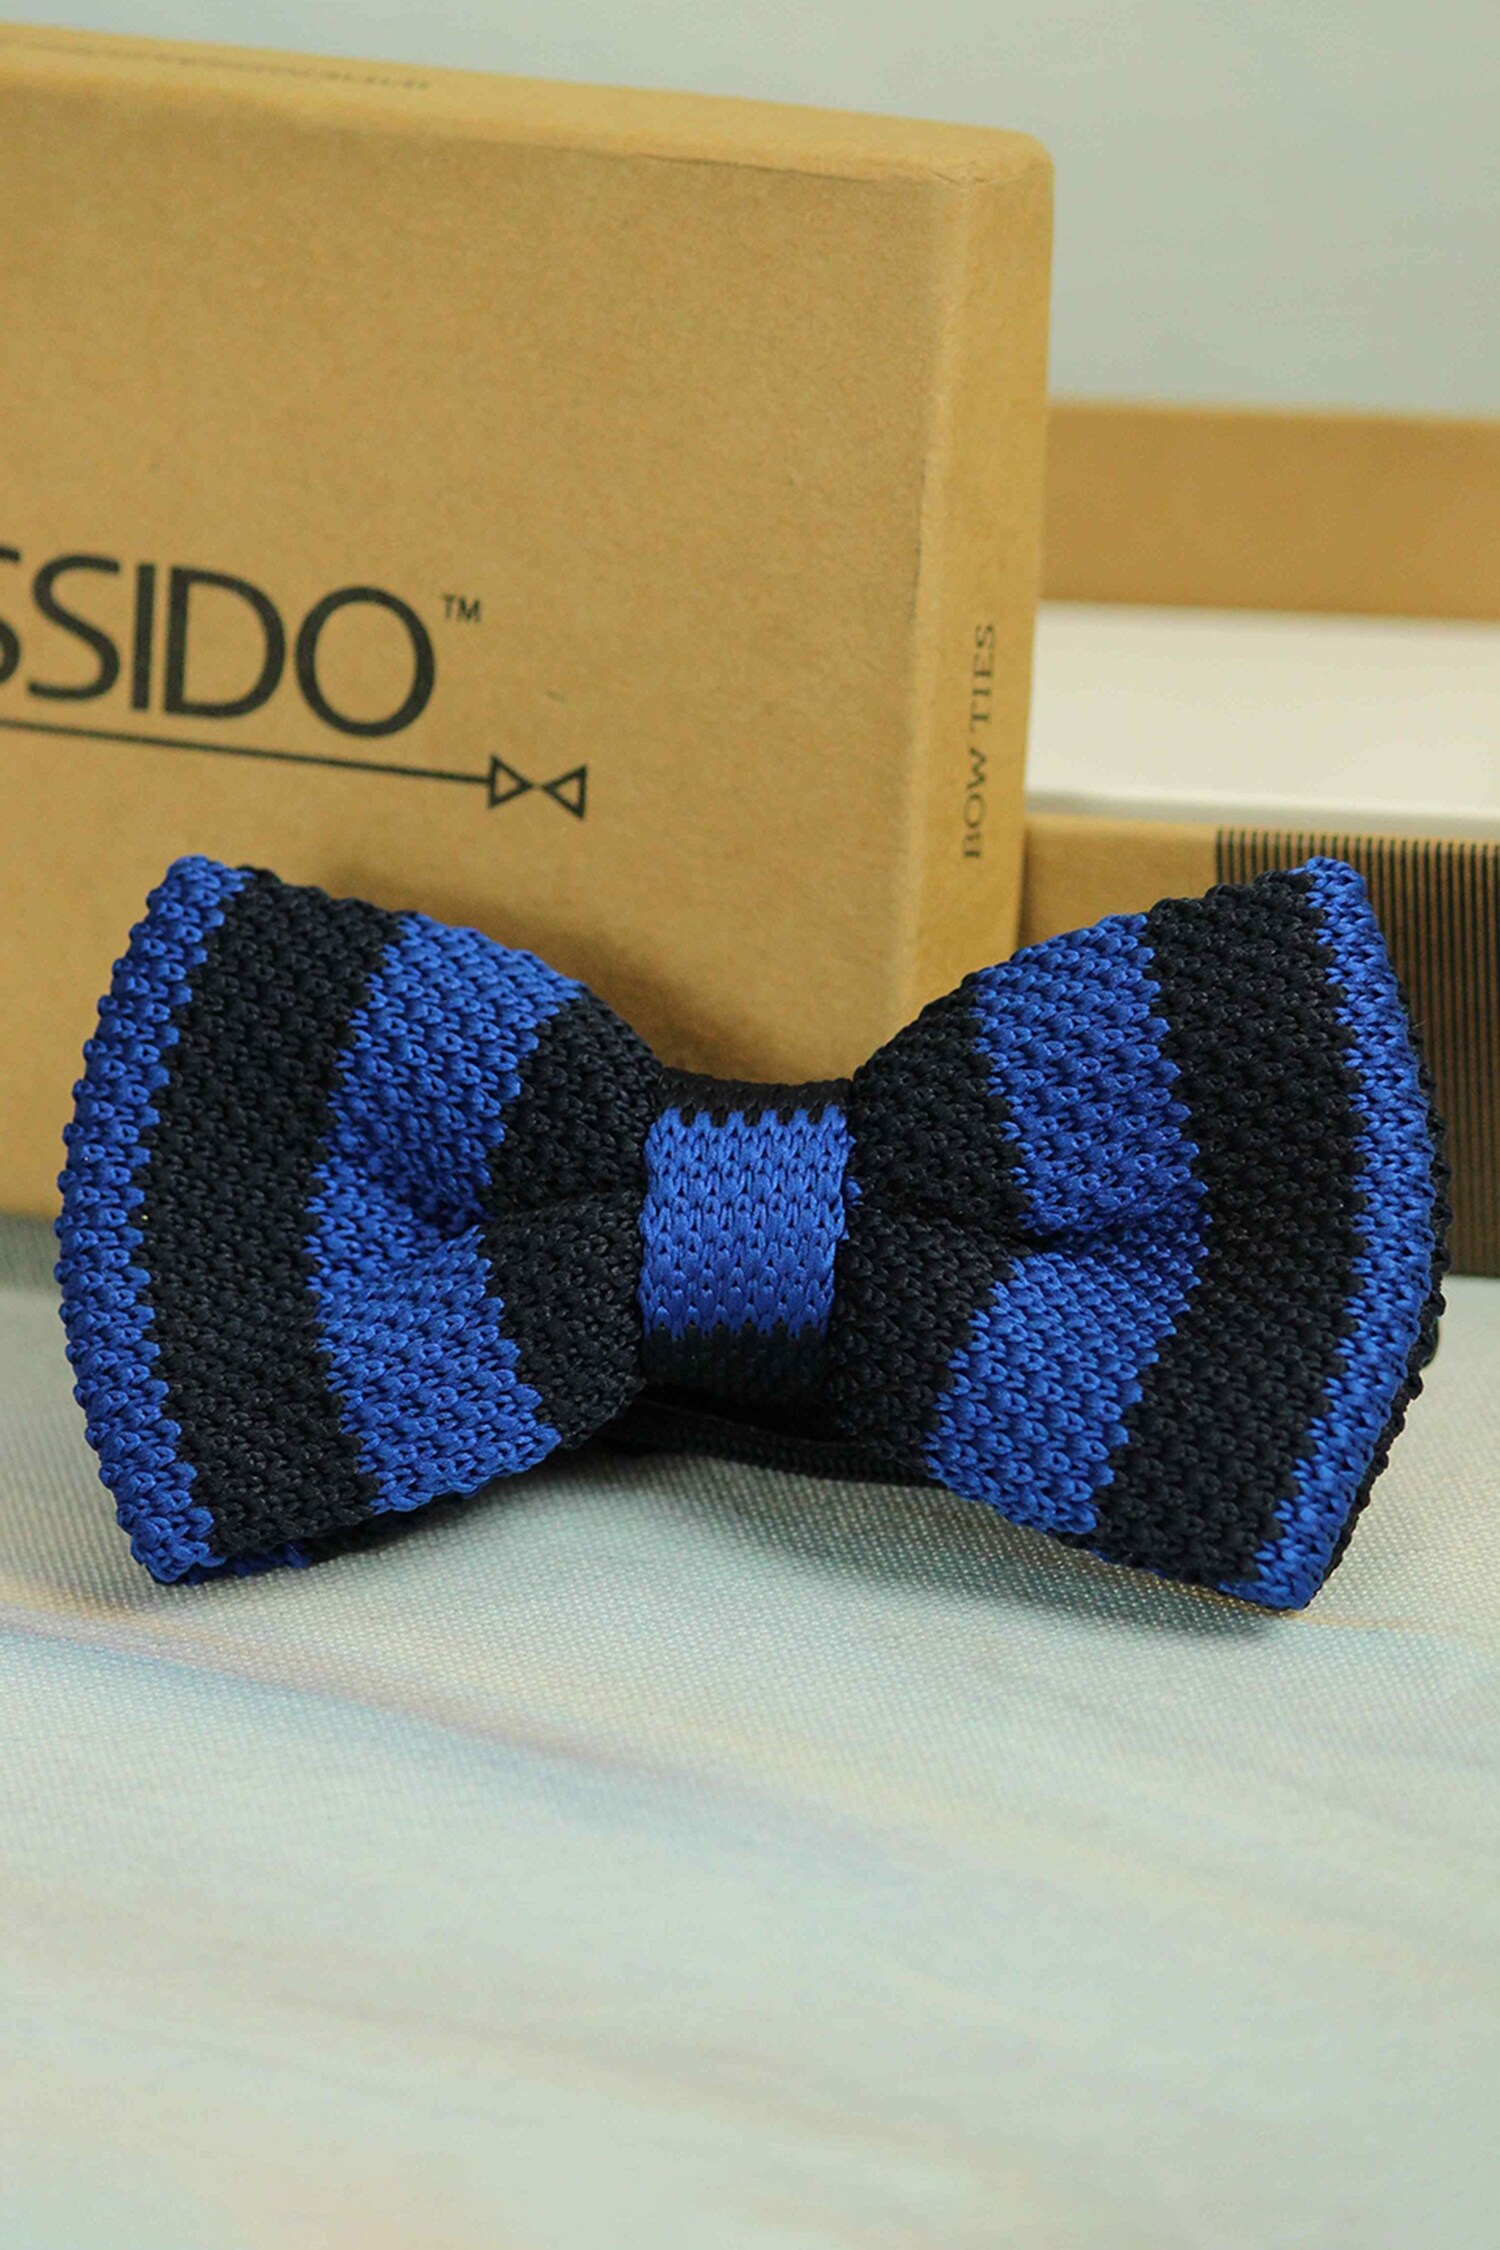 Tossido Blue Embroidered Striped Bow Tie